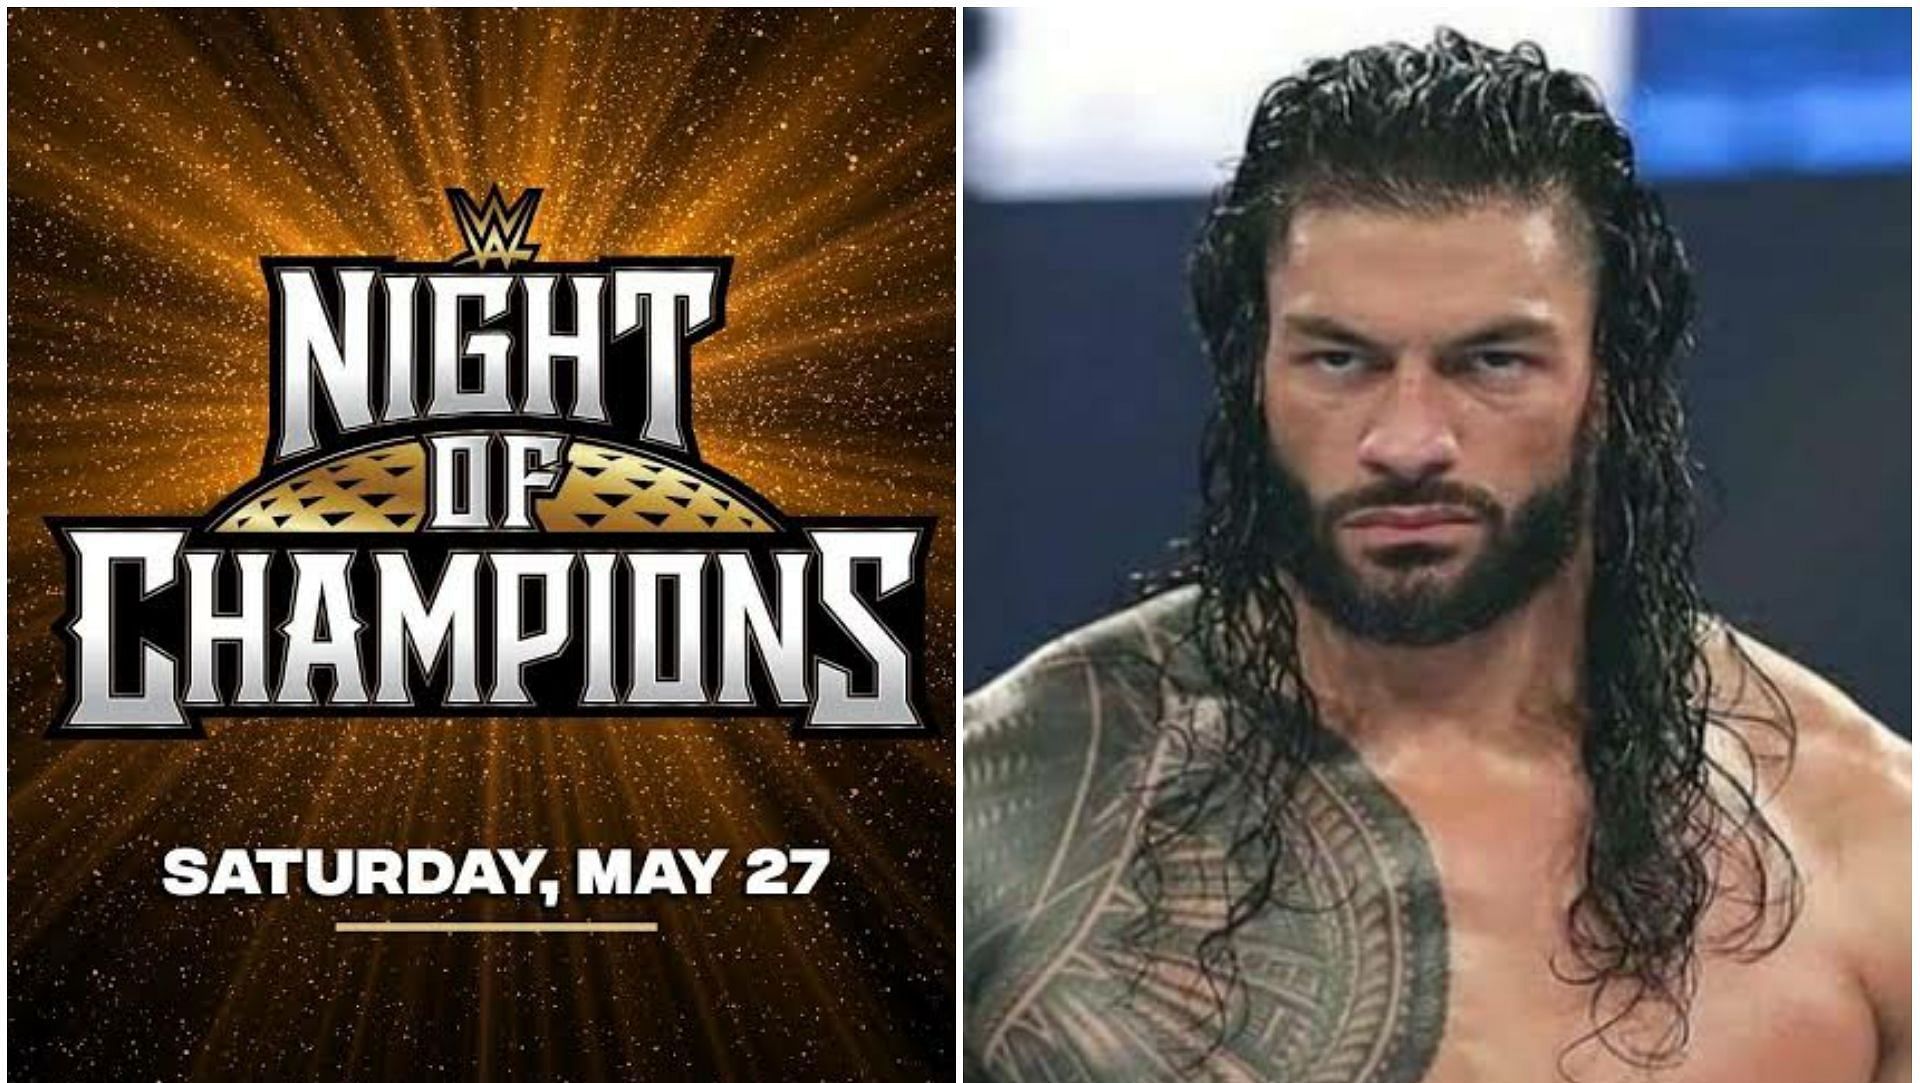 Roman Reigns could be in action at WWE Night of Champions.